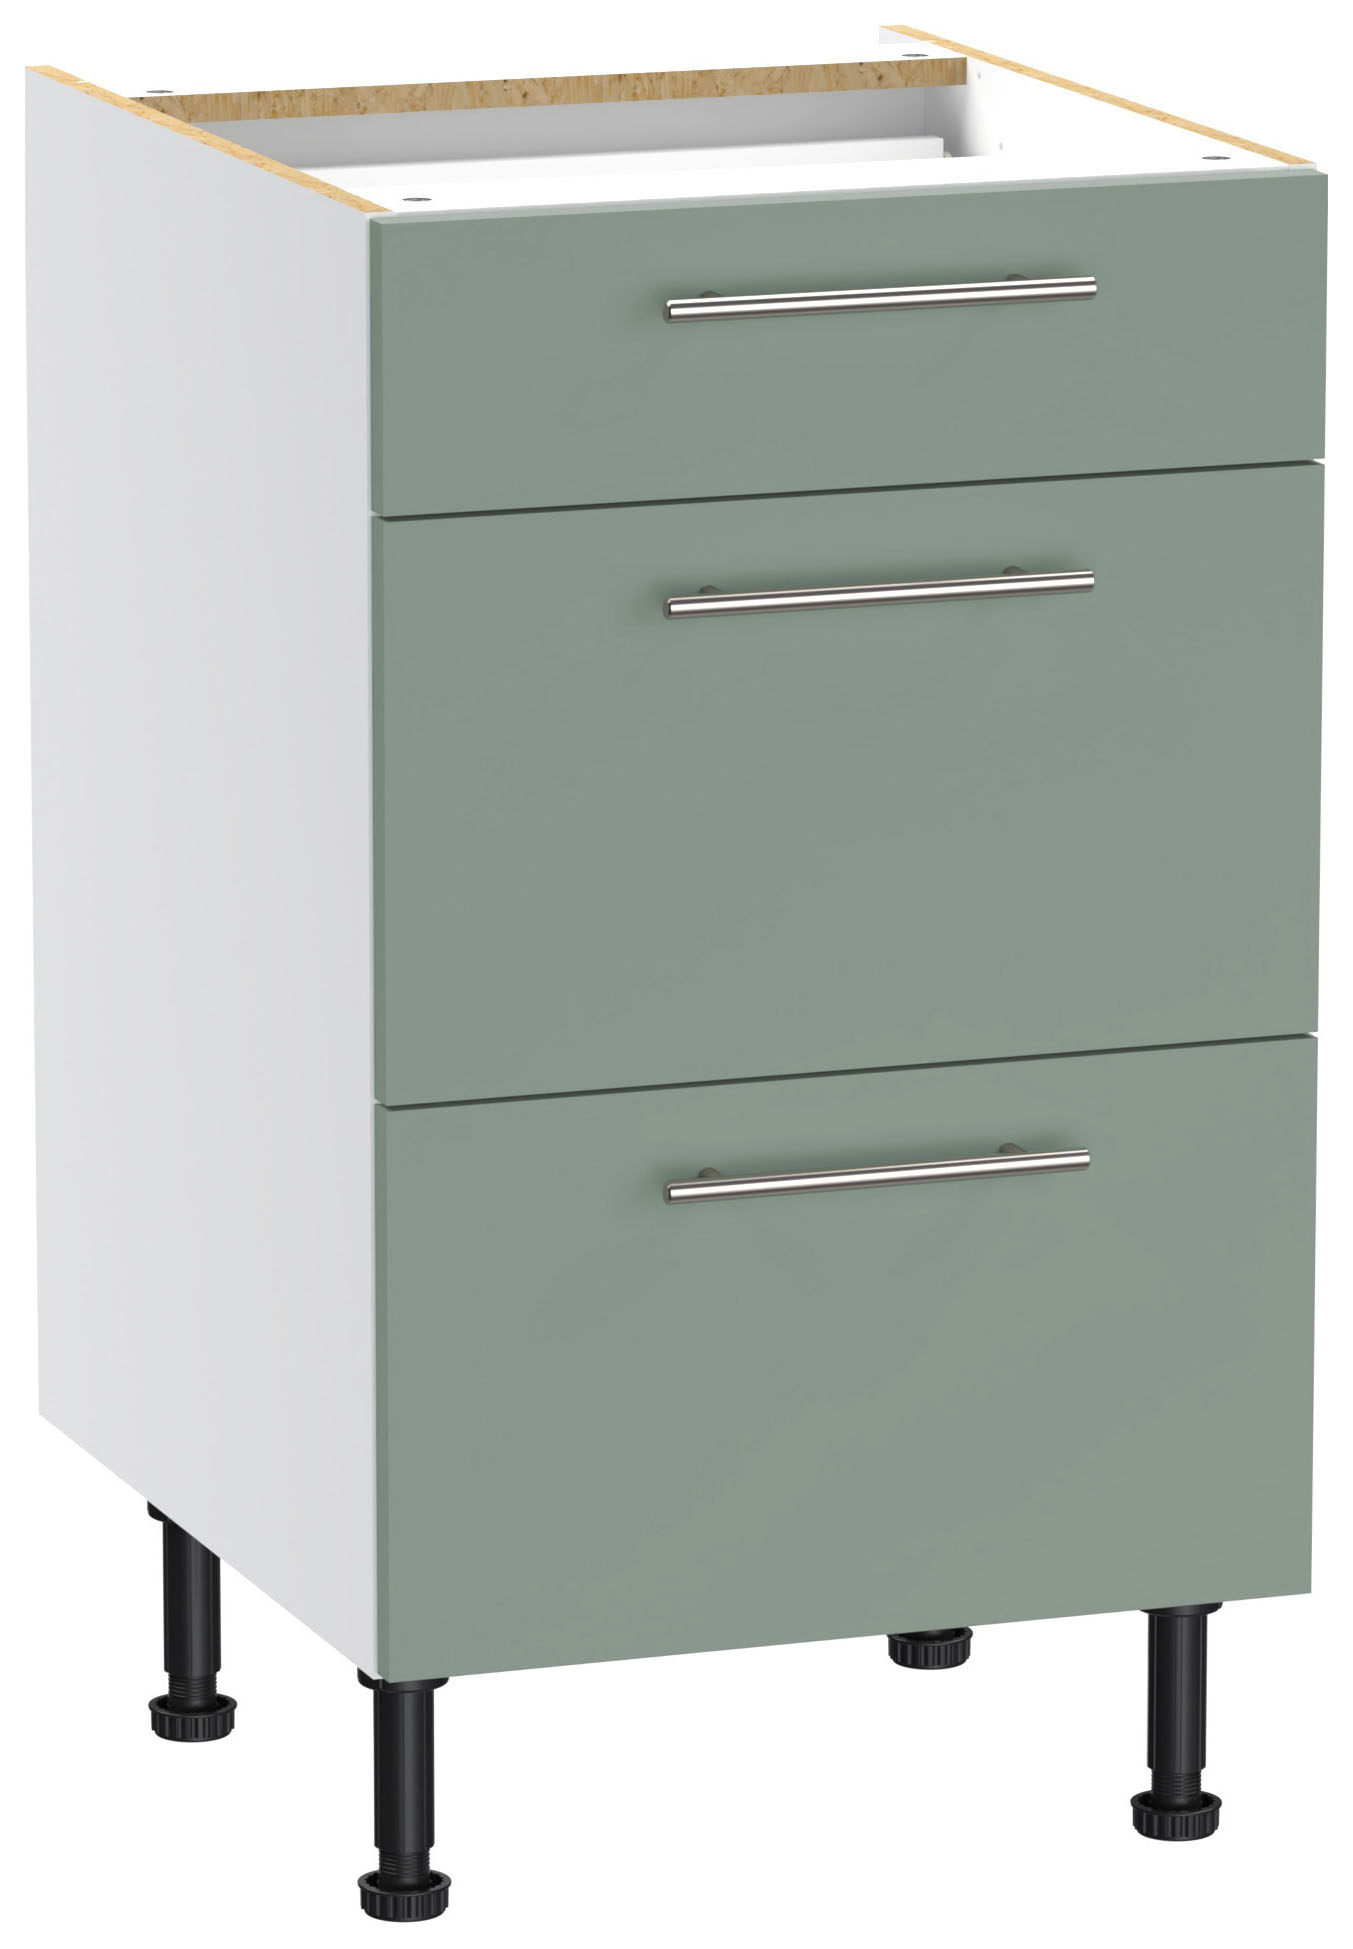 500 Mm Drawer Unit | wickes.co.uk